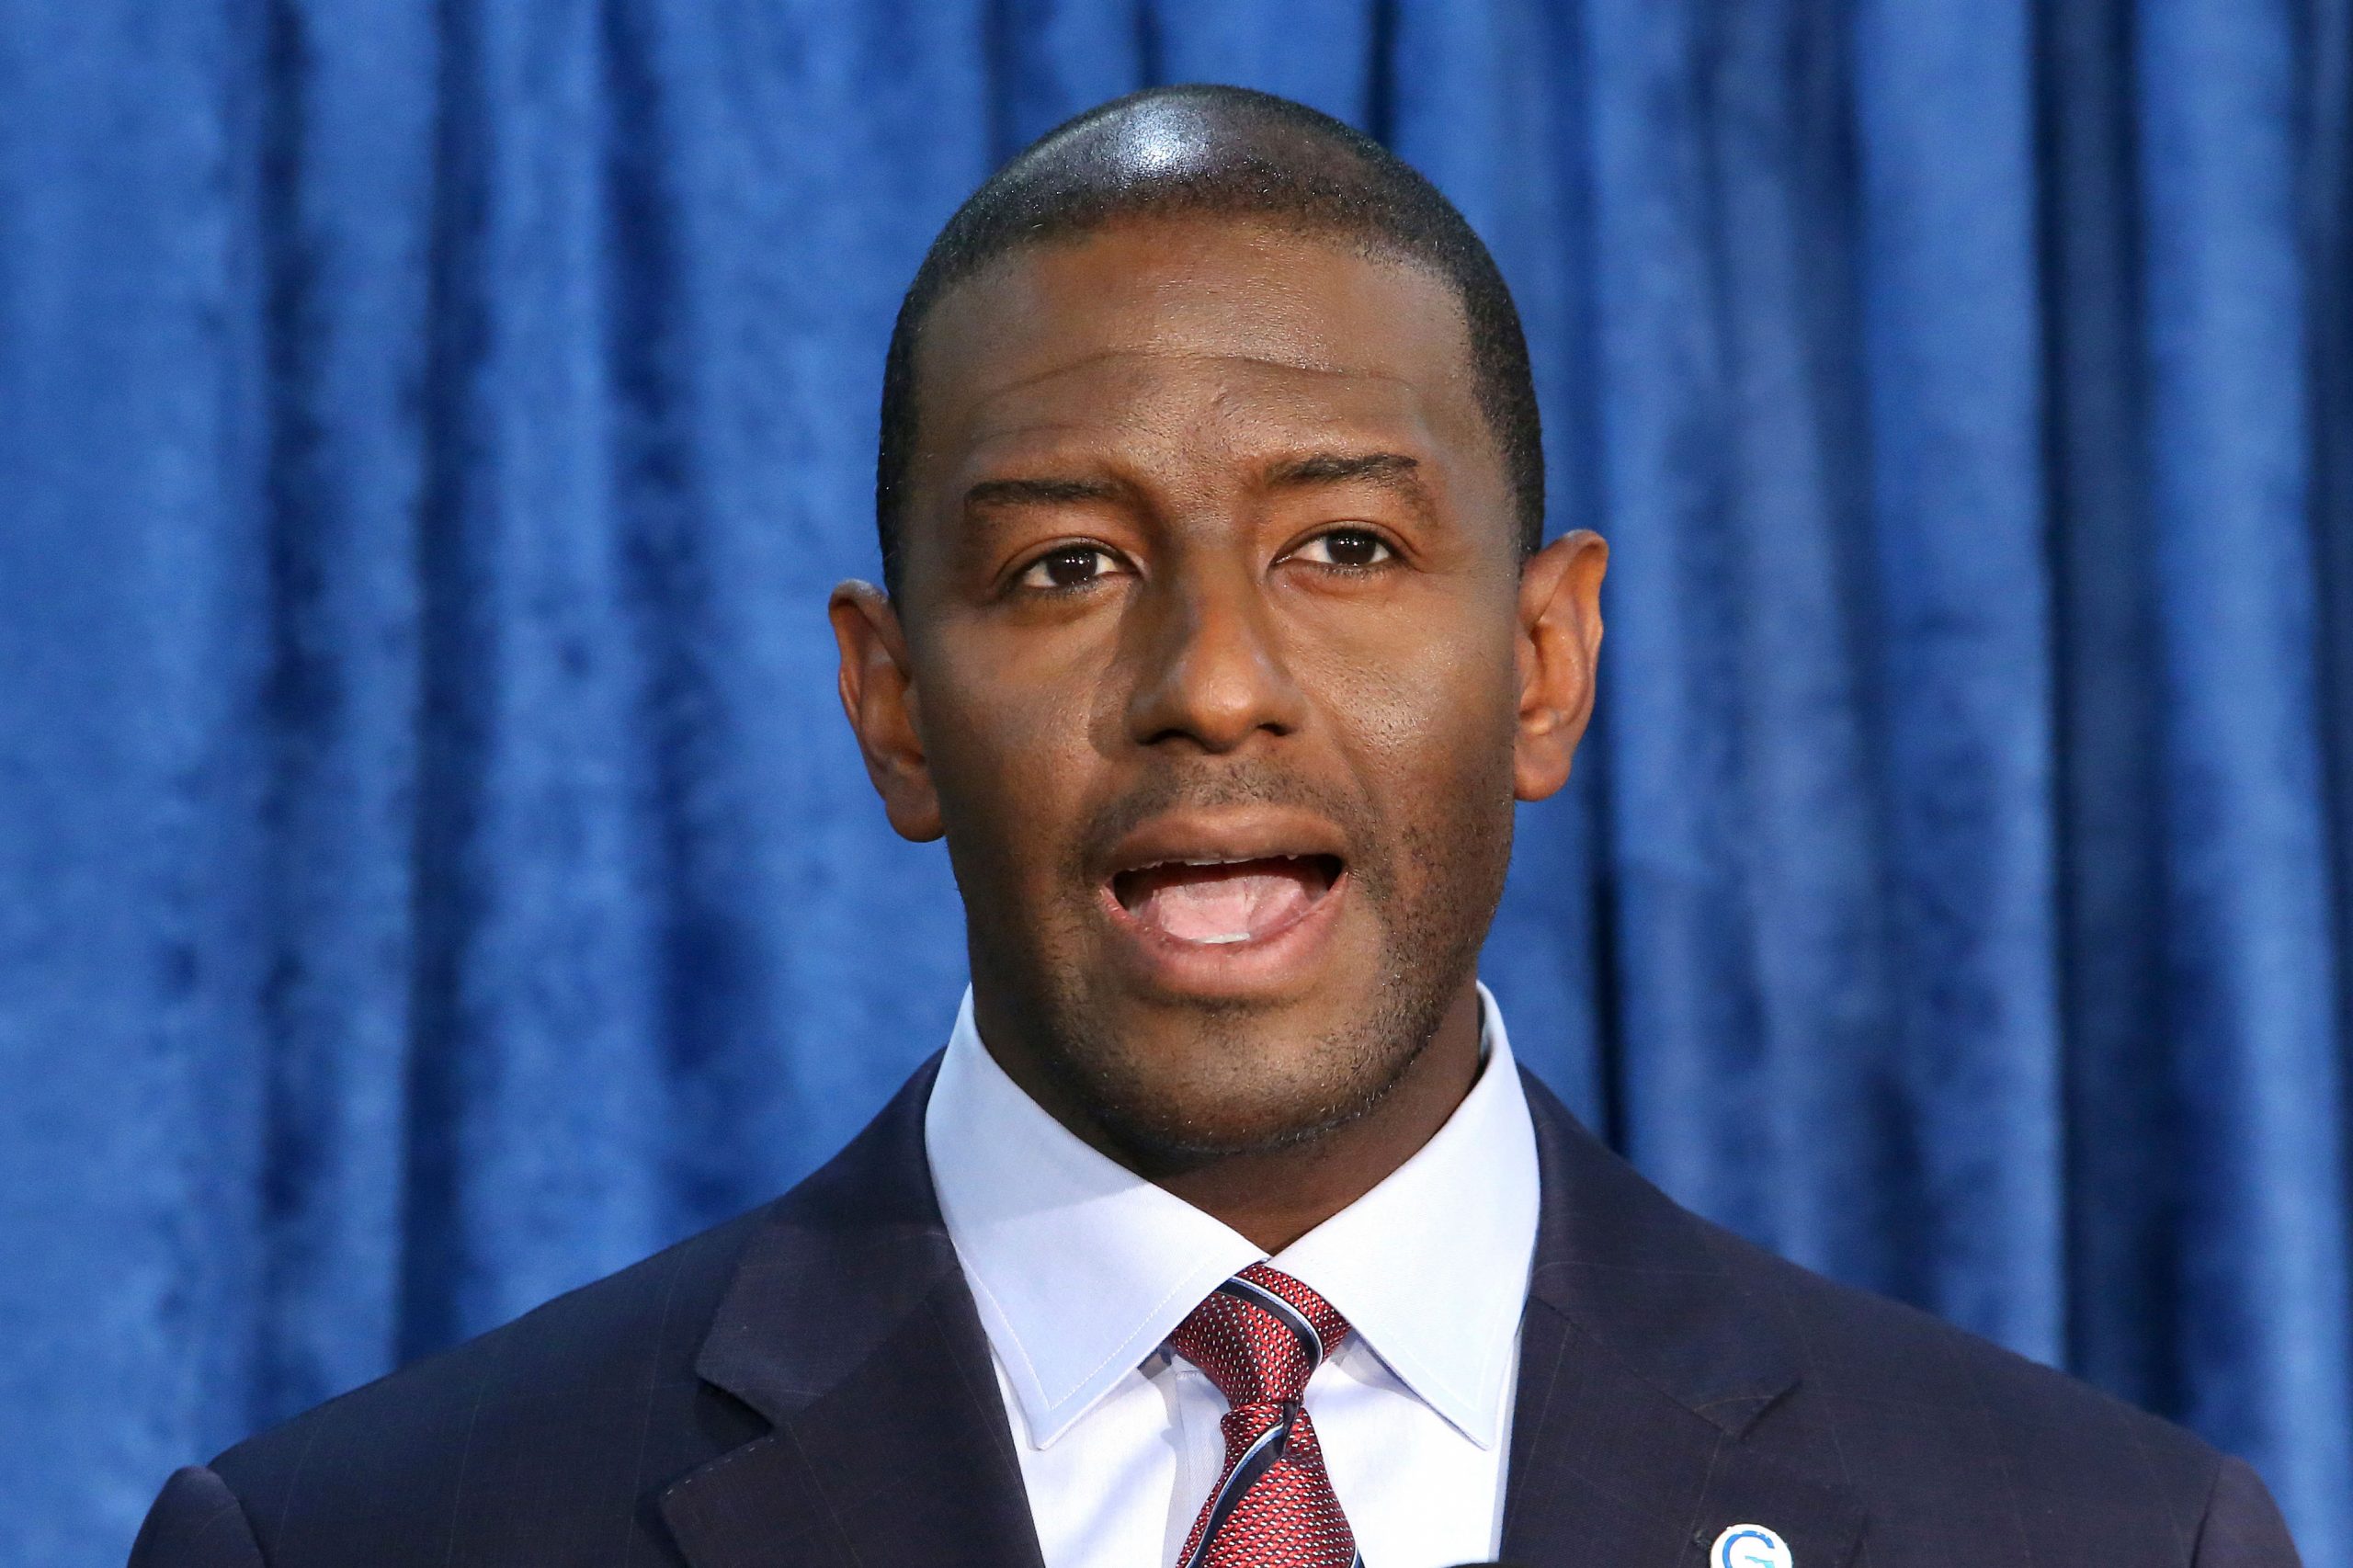 Why Andrew Gillum, former Florida governor nominee, has been indicted